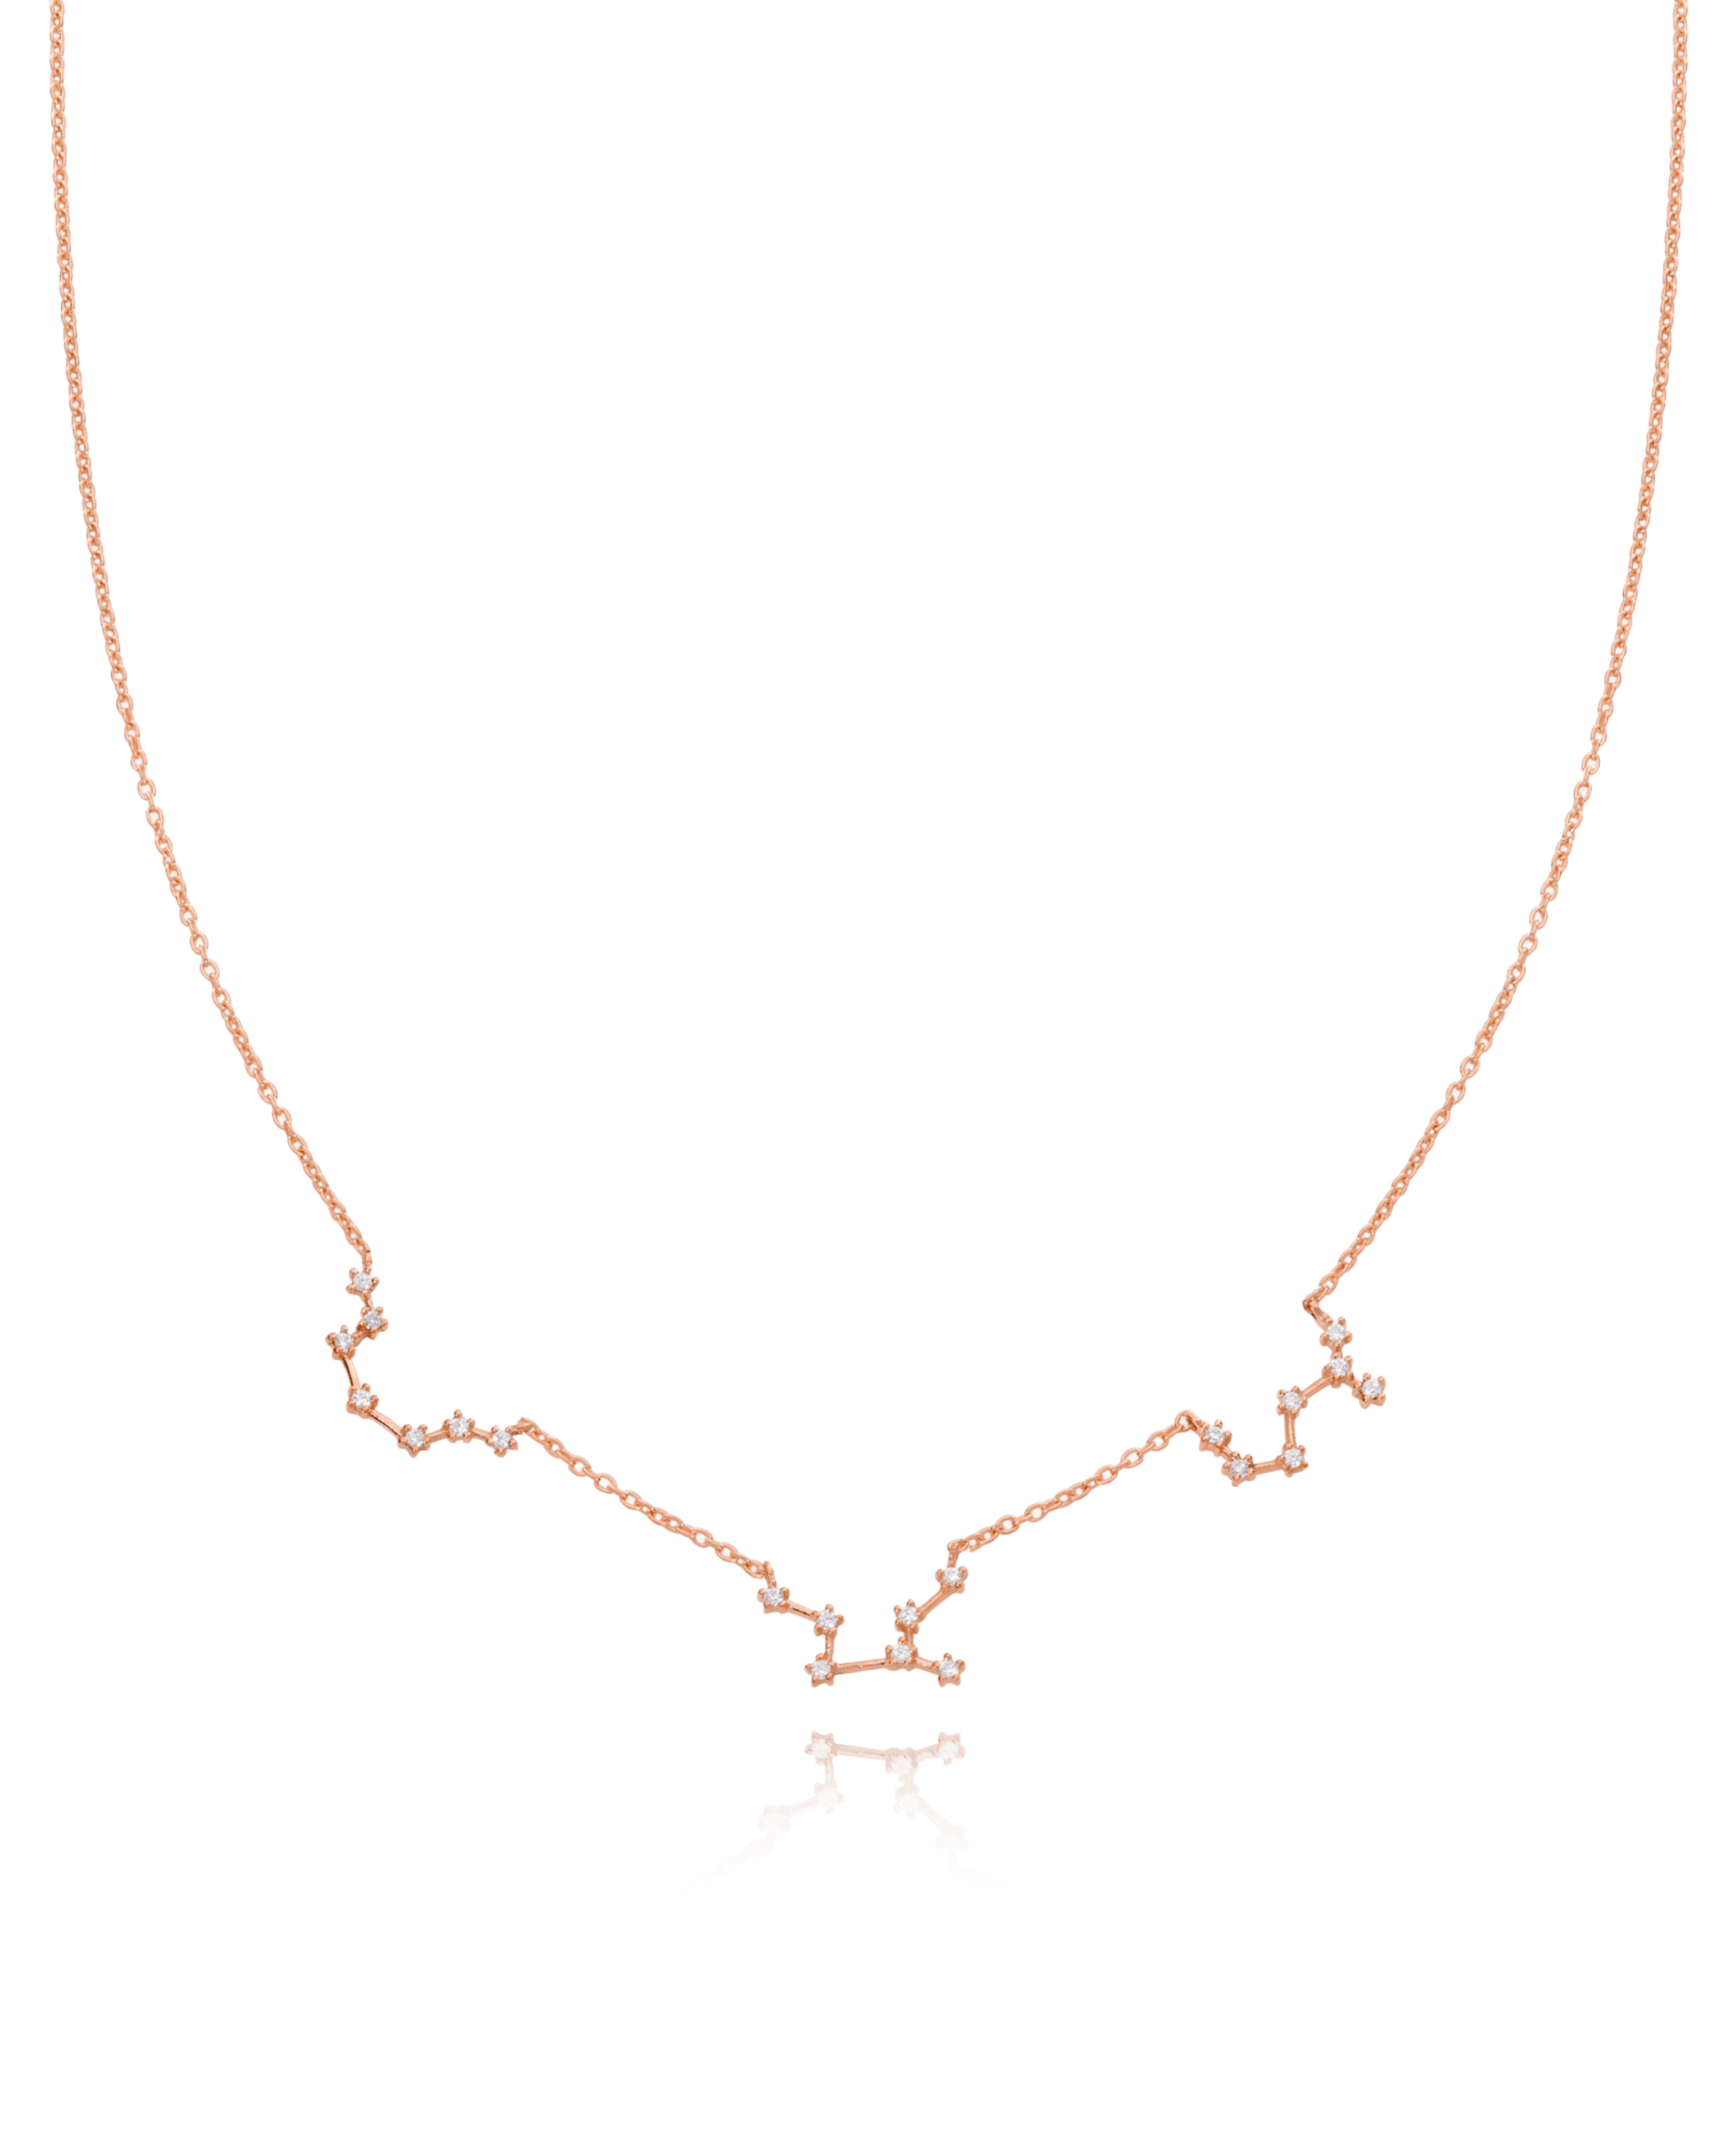 Constellation Necklace with Diamonds - 18K Rose Vermeil Necklaces magal-dev 1 Constellation 16" 